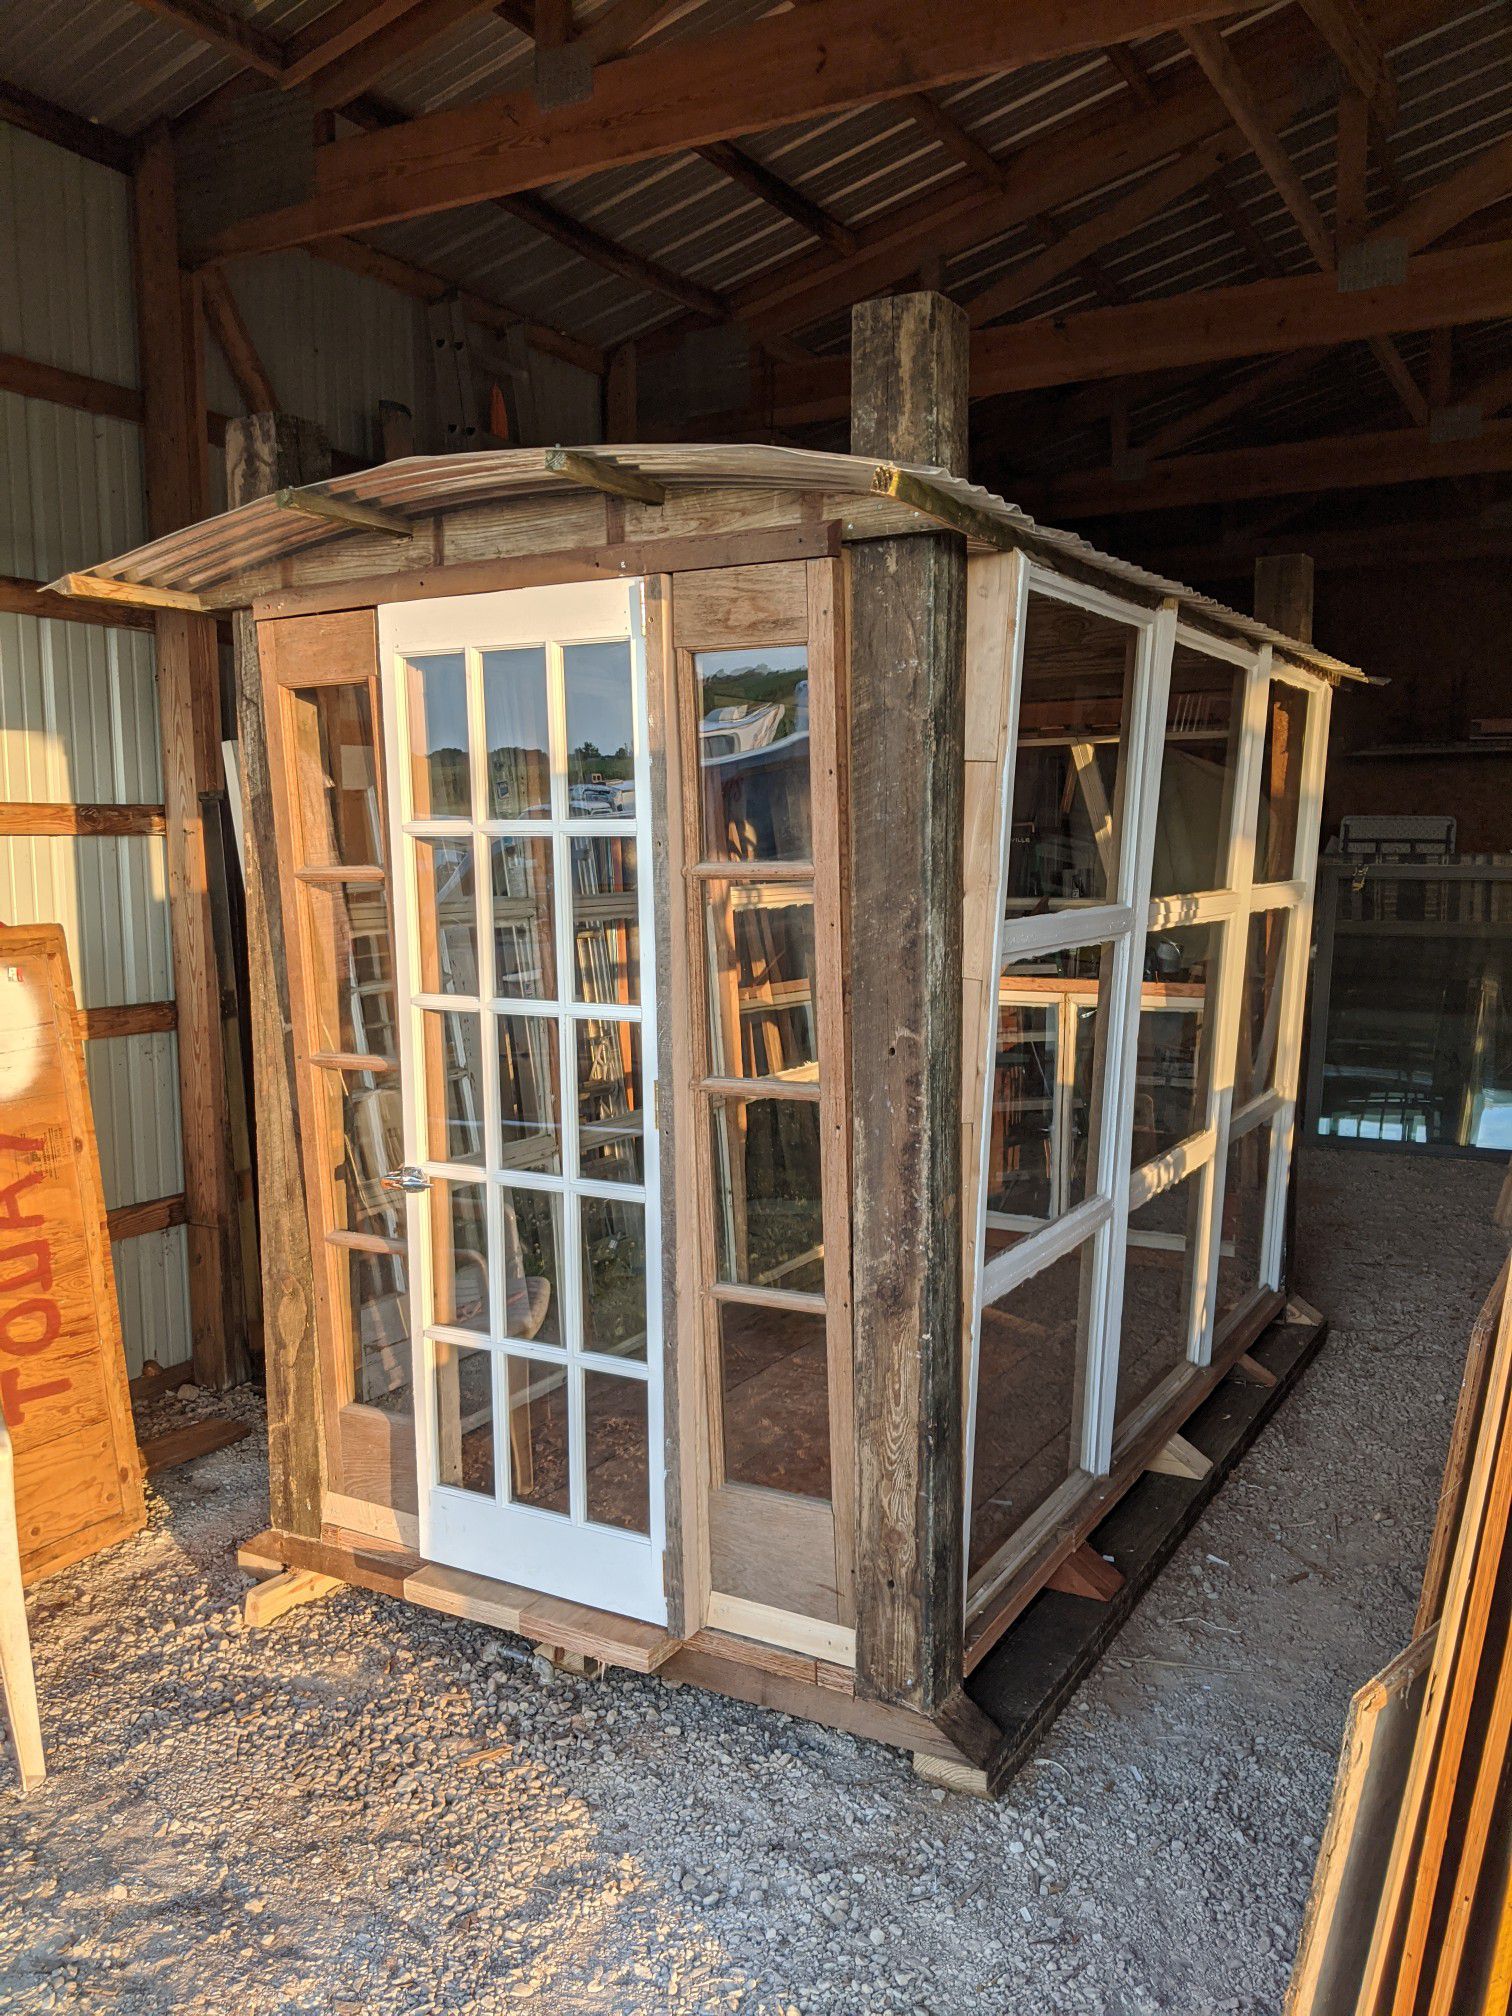 Greenhouse, she shed, playhouse